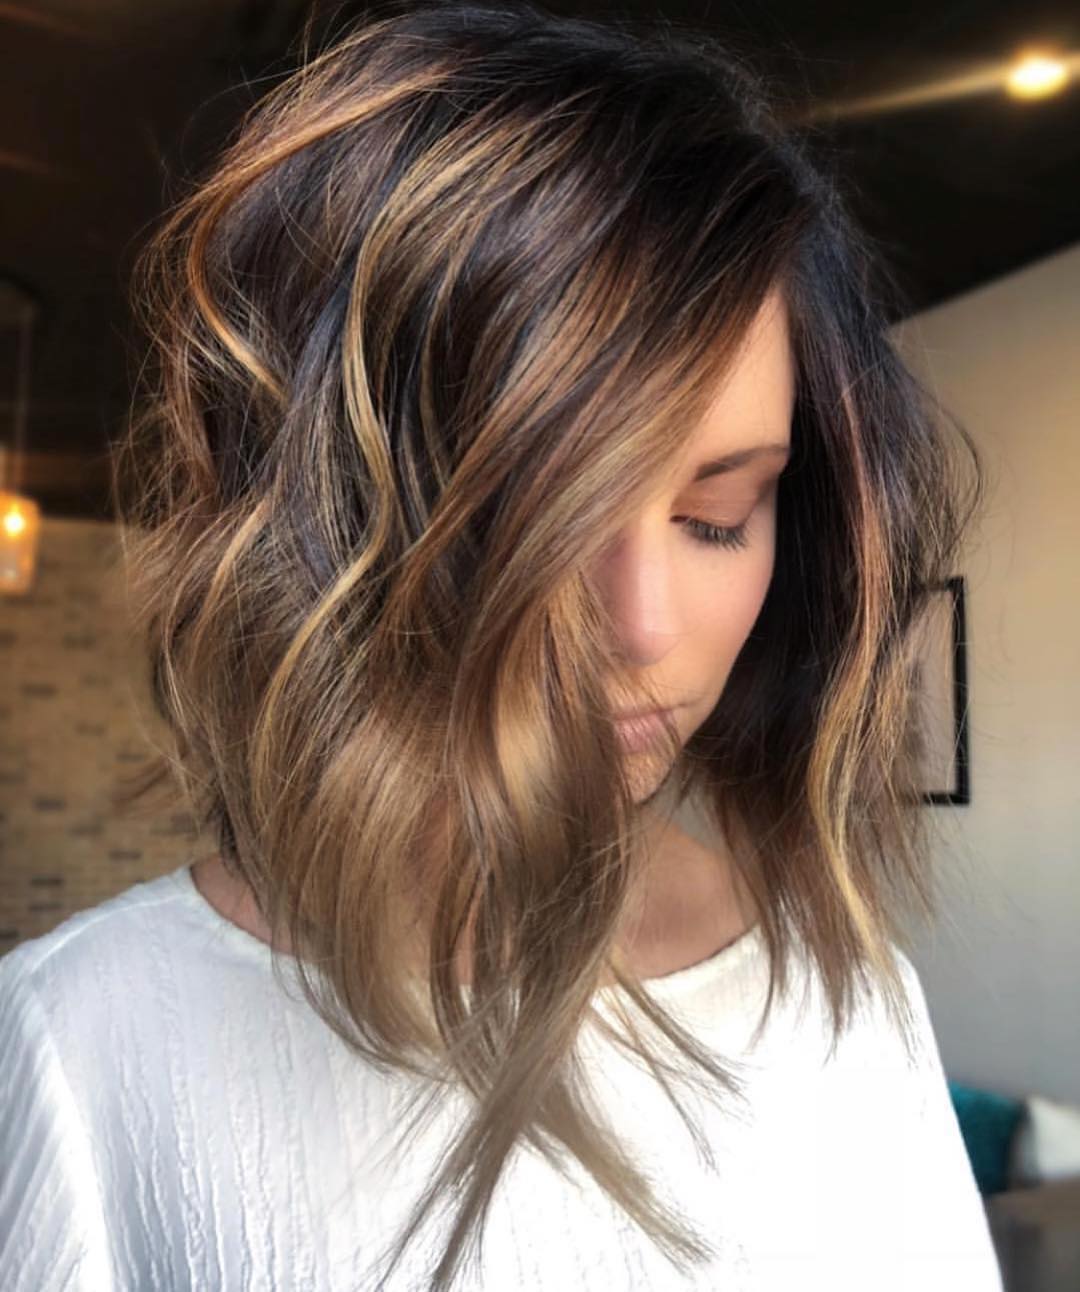 Stylish Ombre Balayage Hairstyles For Shoulder Length Hair 2019